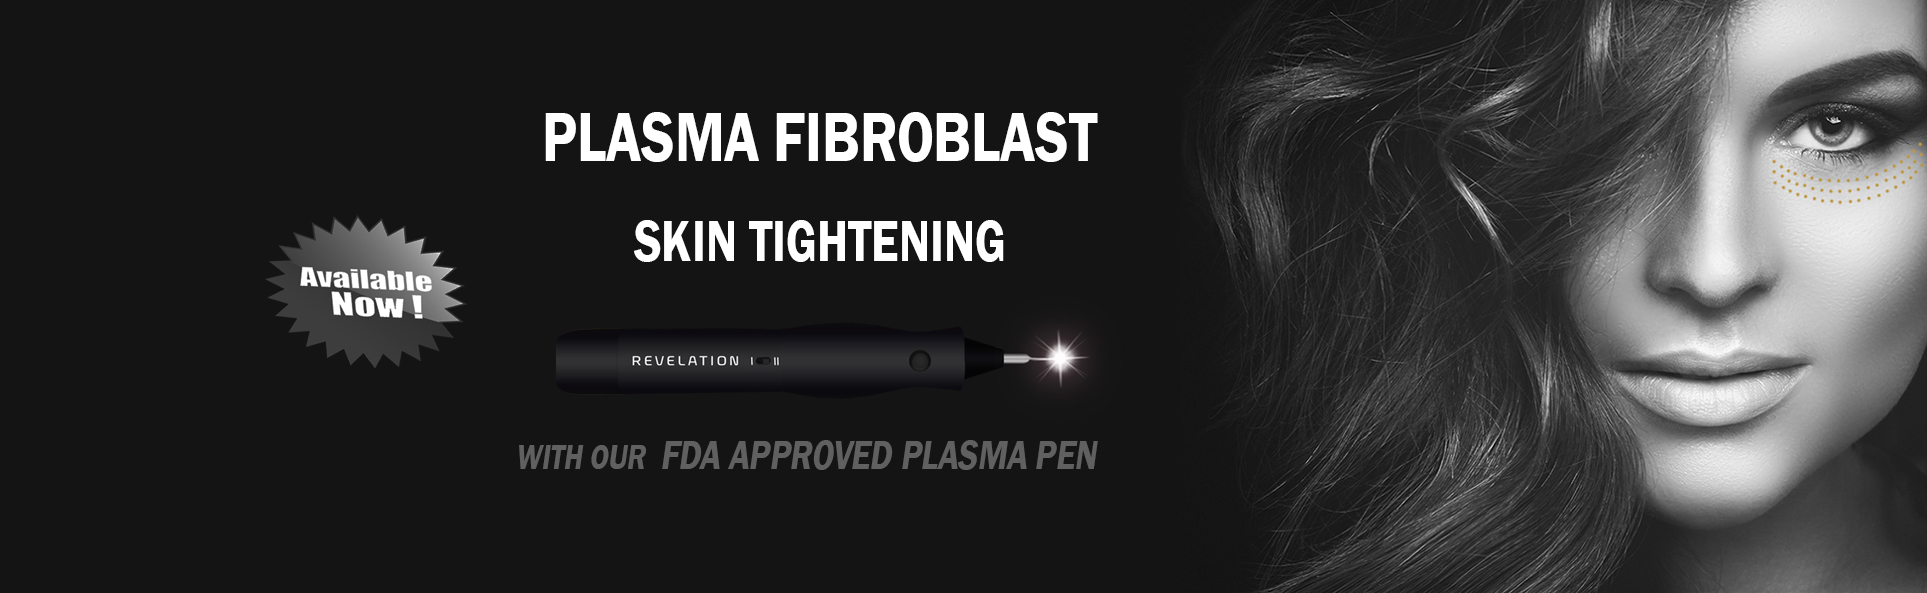 Young Skin Care FDA Approved Plasma Pen